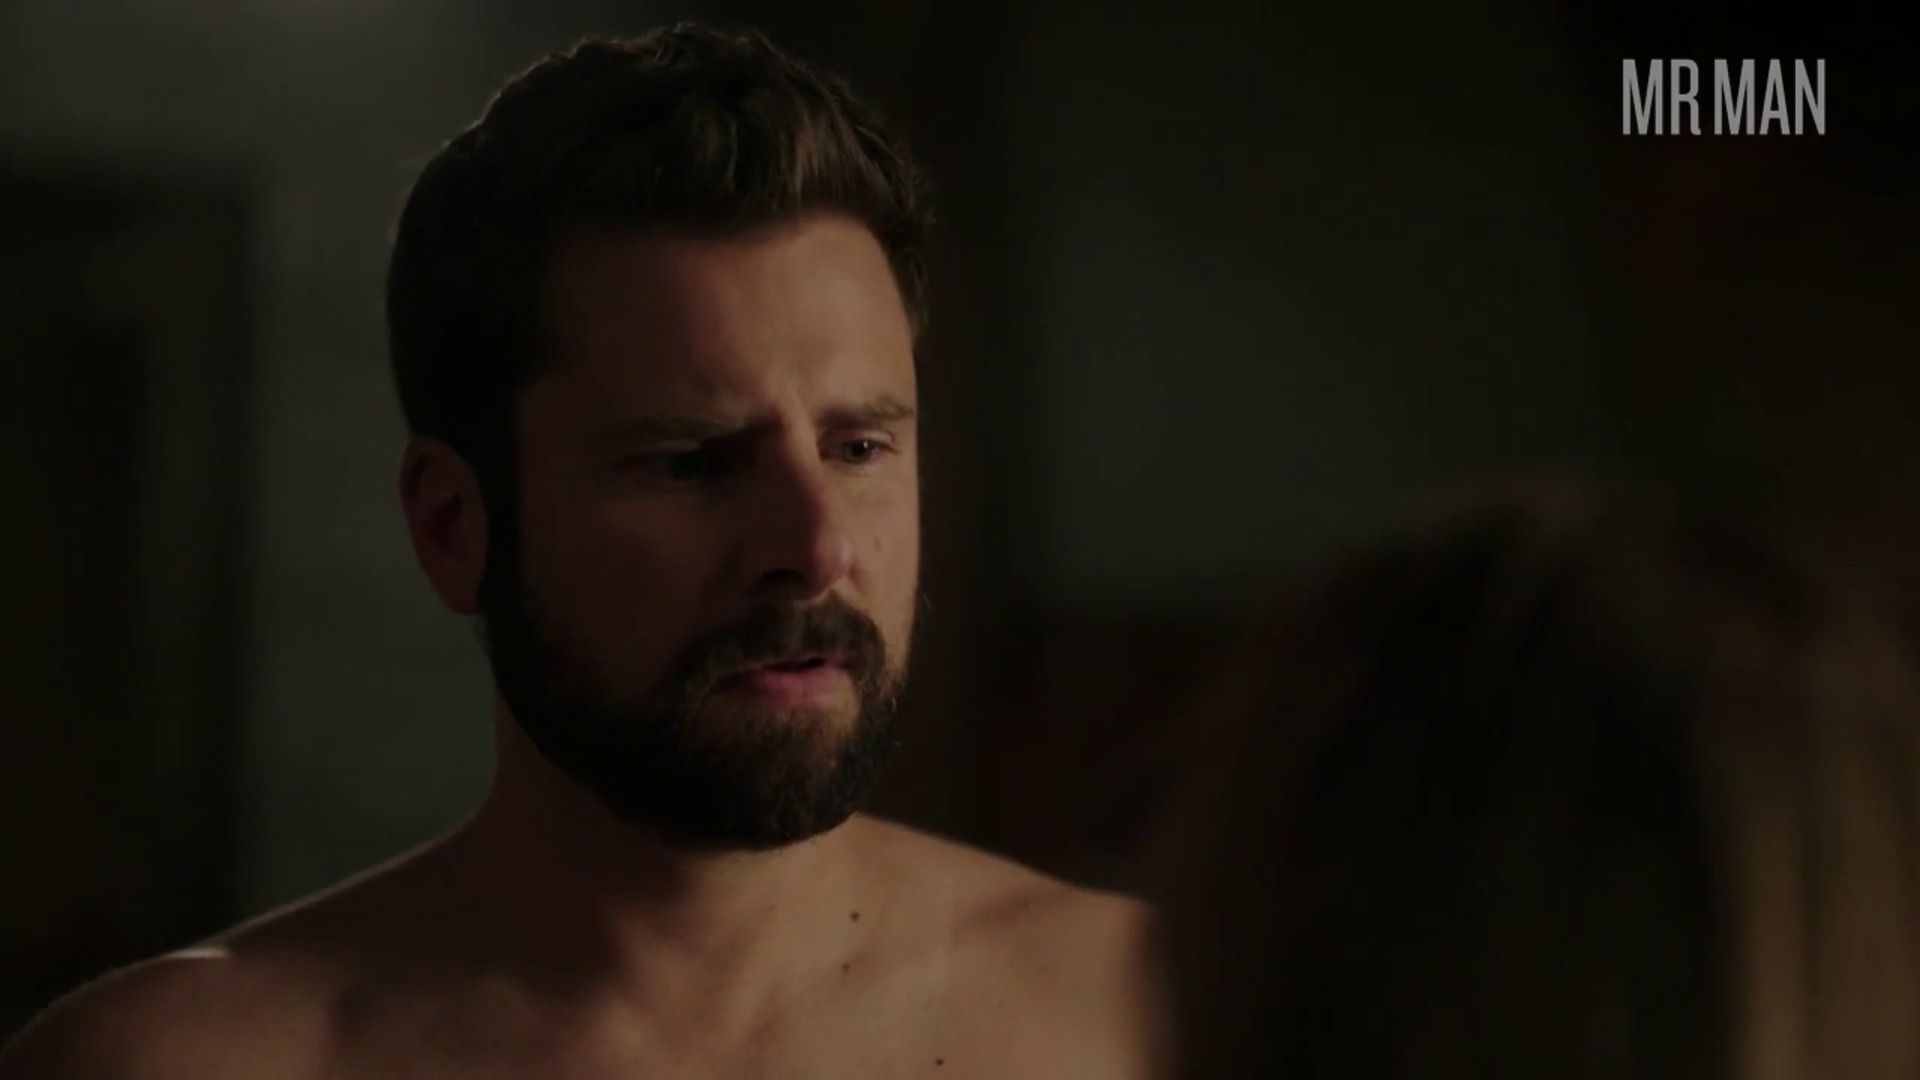 James Roday Nude? Find out at Mr. Man